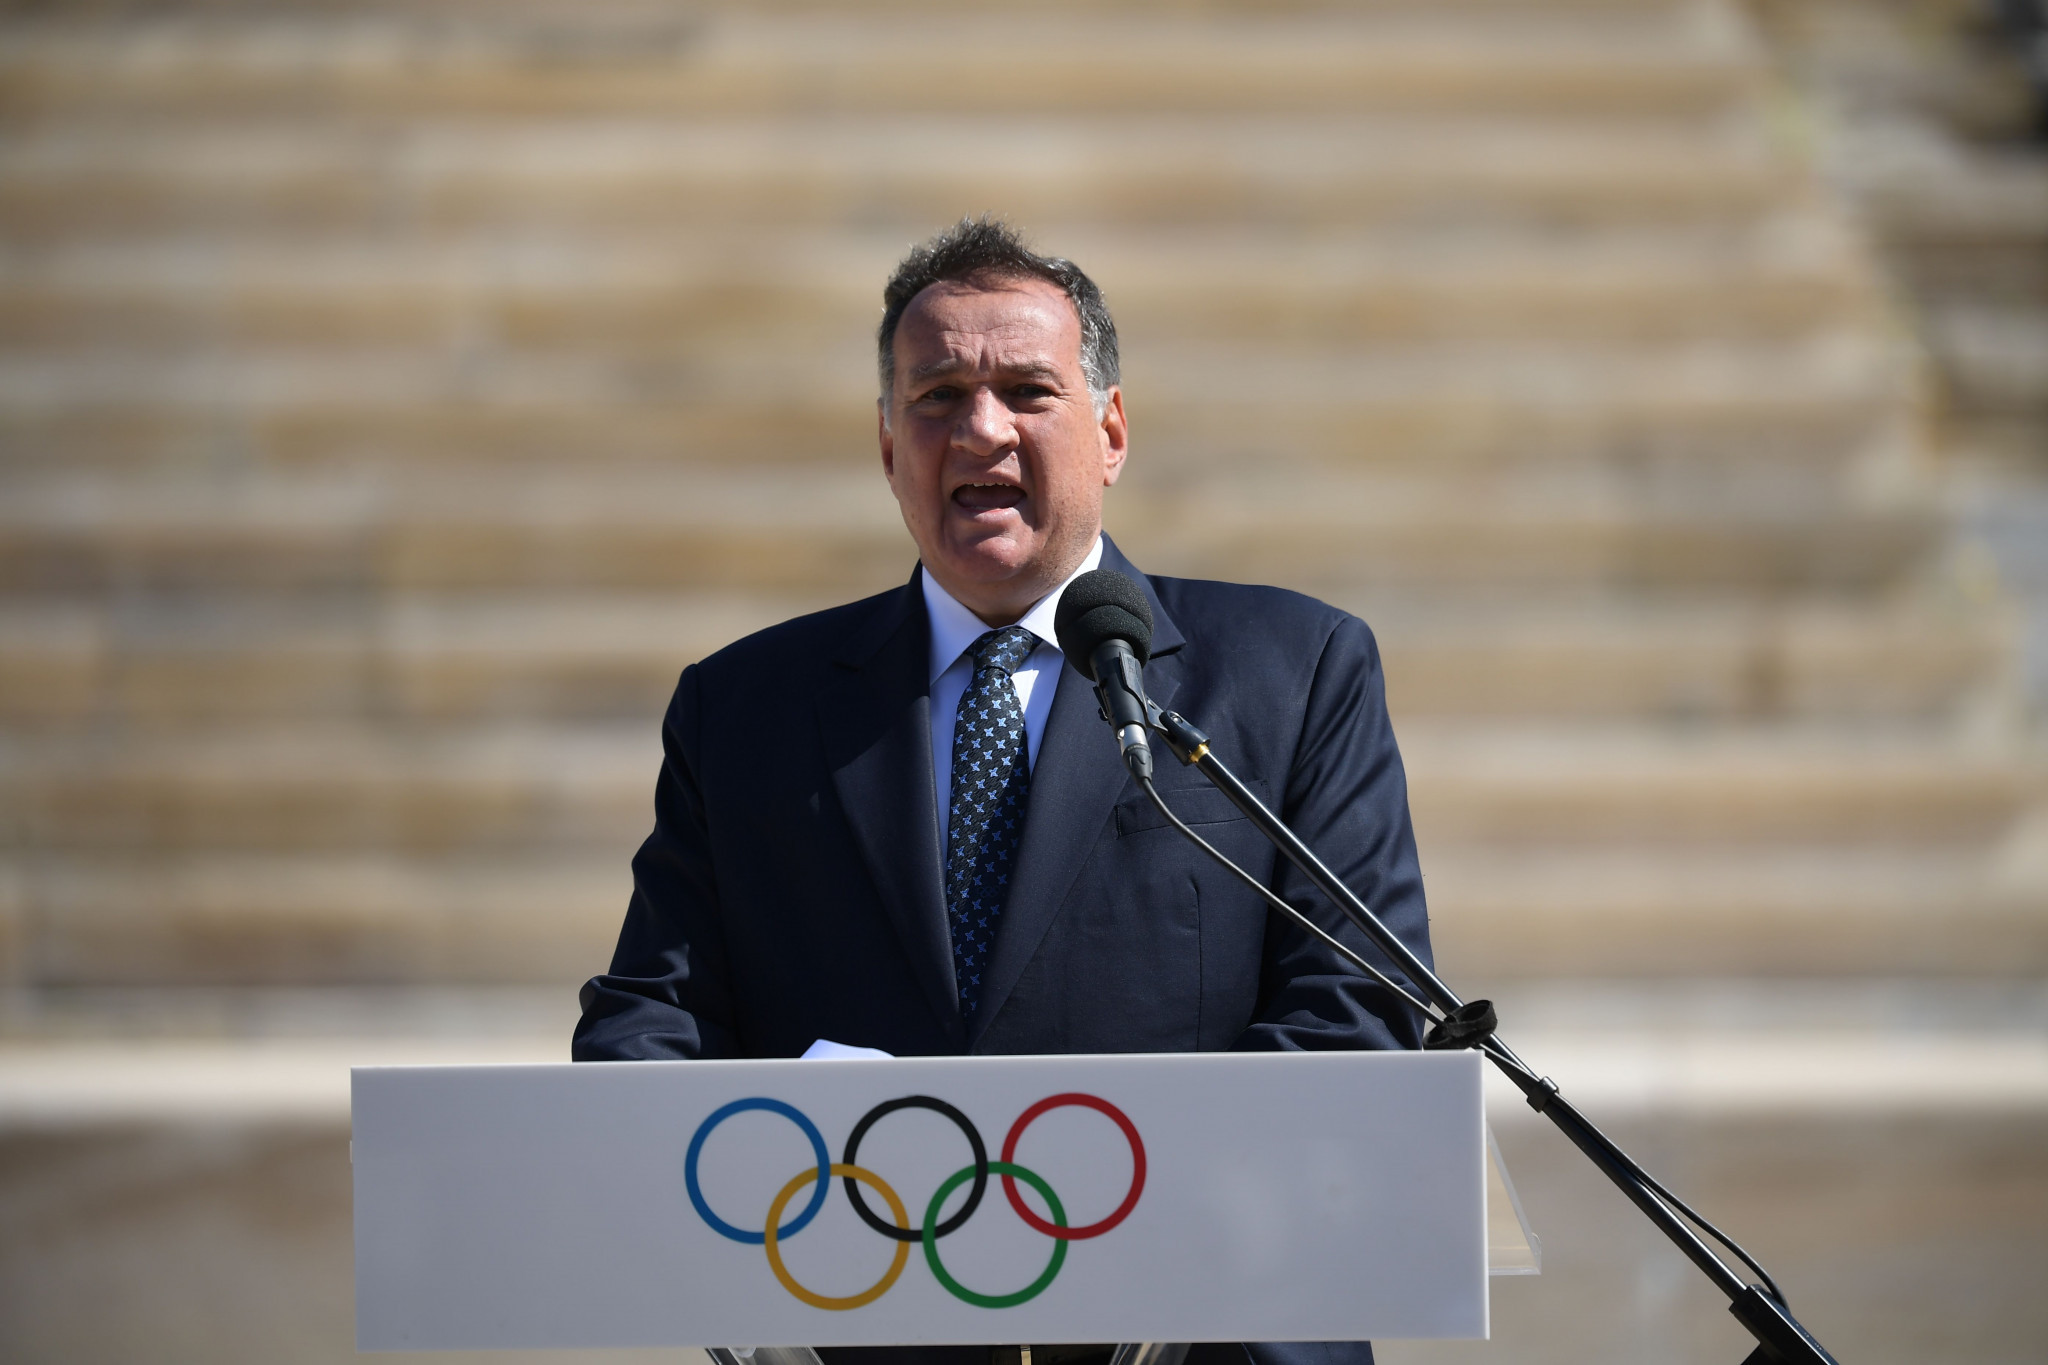 Members of the Hellenic Olympic Committee unanimously adopted a proposal by the organisation's President Spyros Capralos that the organisation should oppose any possible boycott of Paris 2024 ©Getty Images